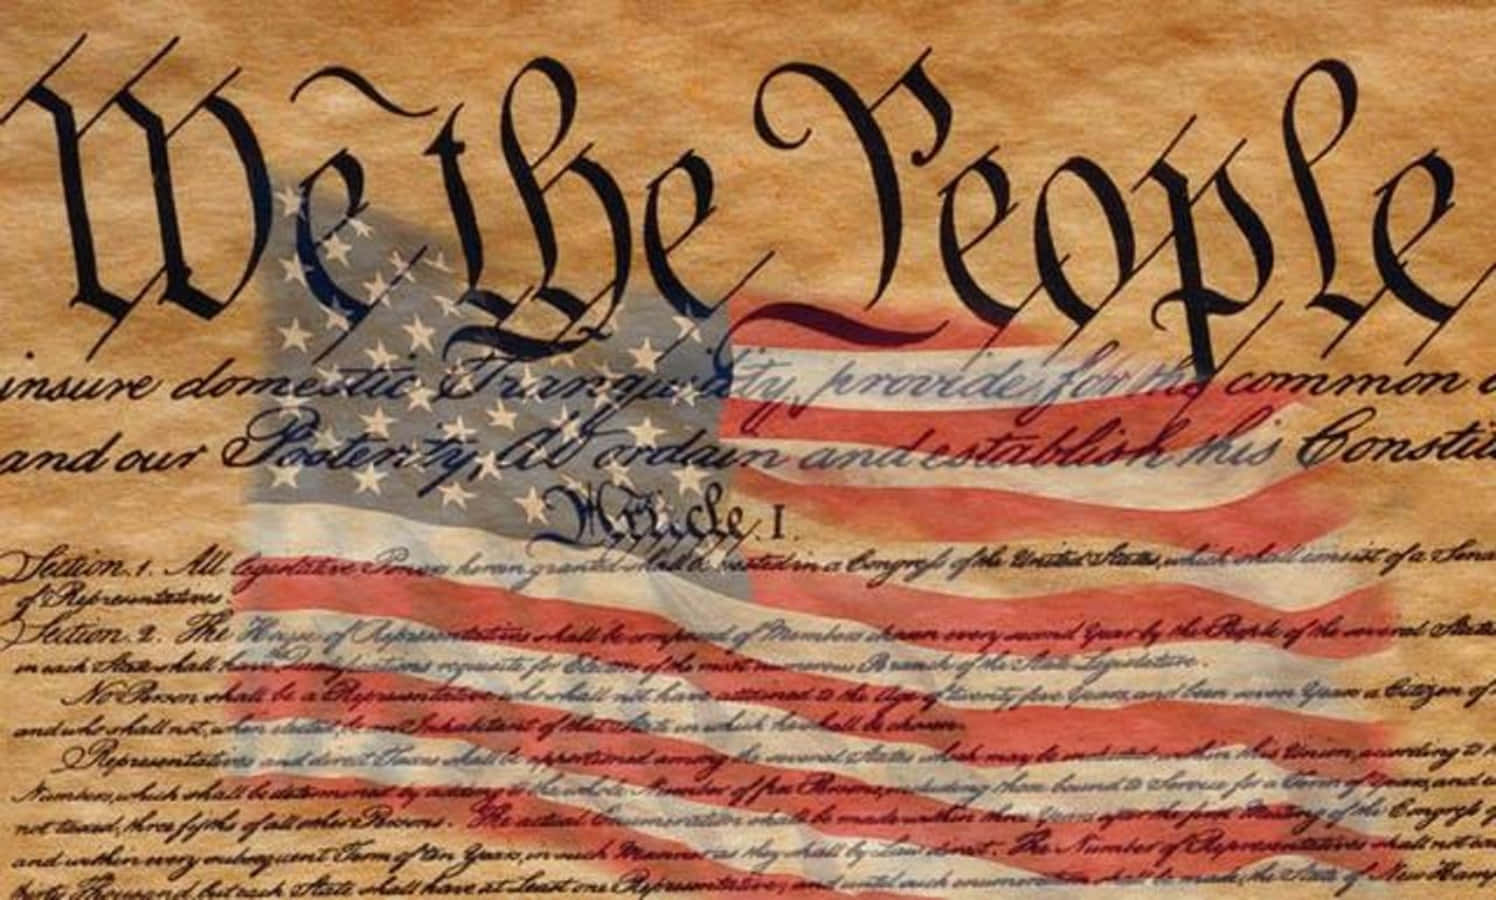 "We the People" Wallpaper